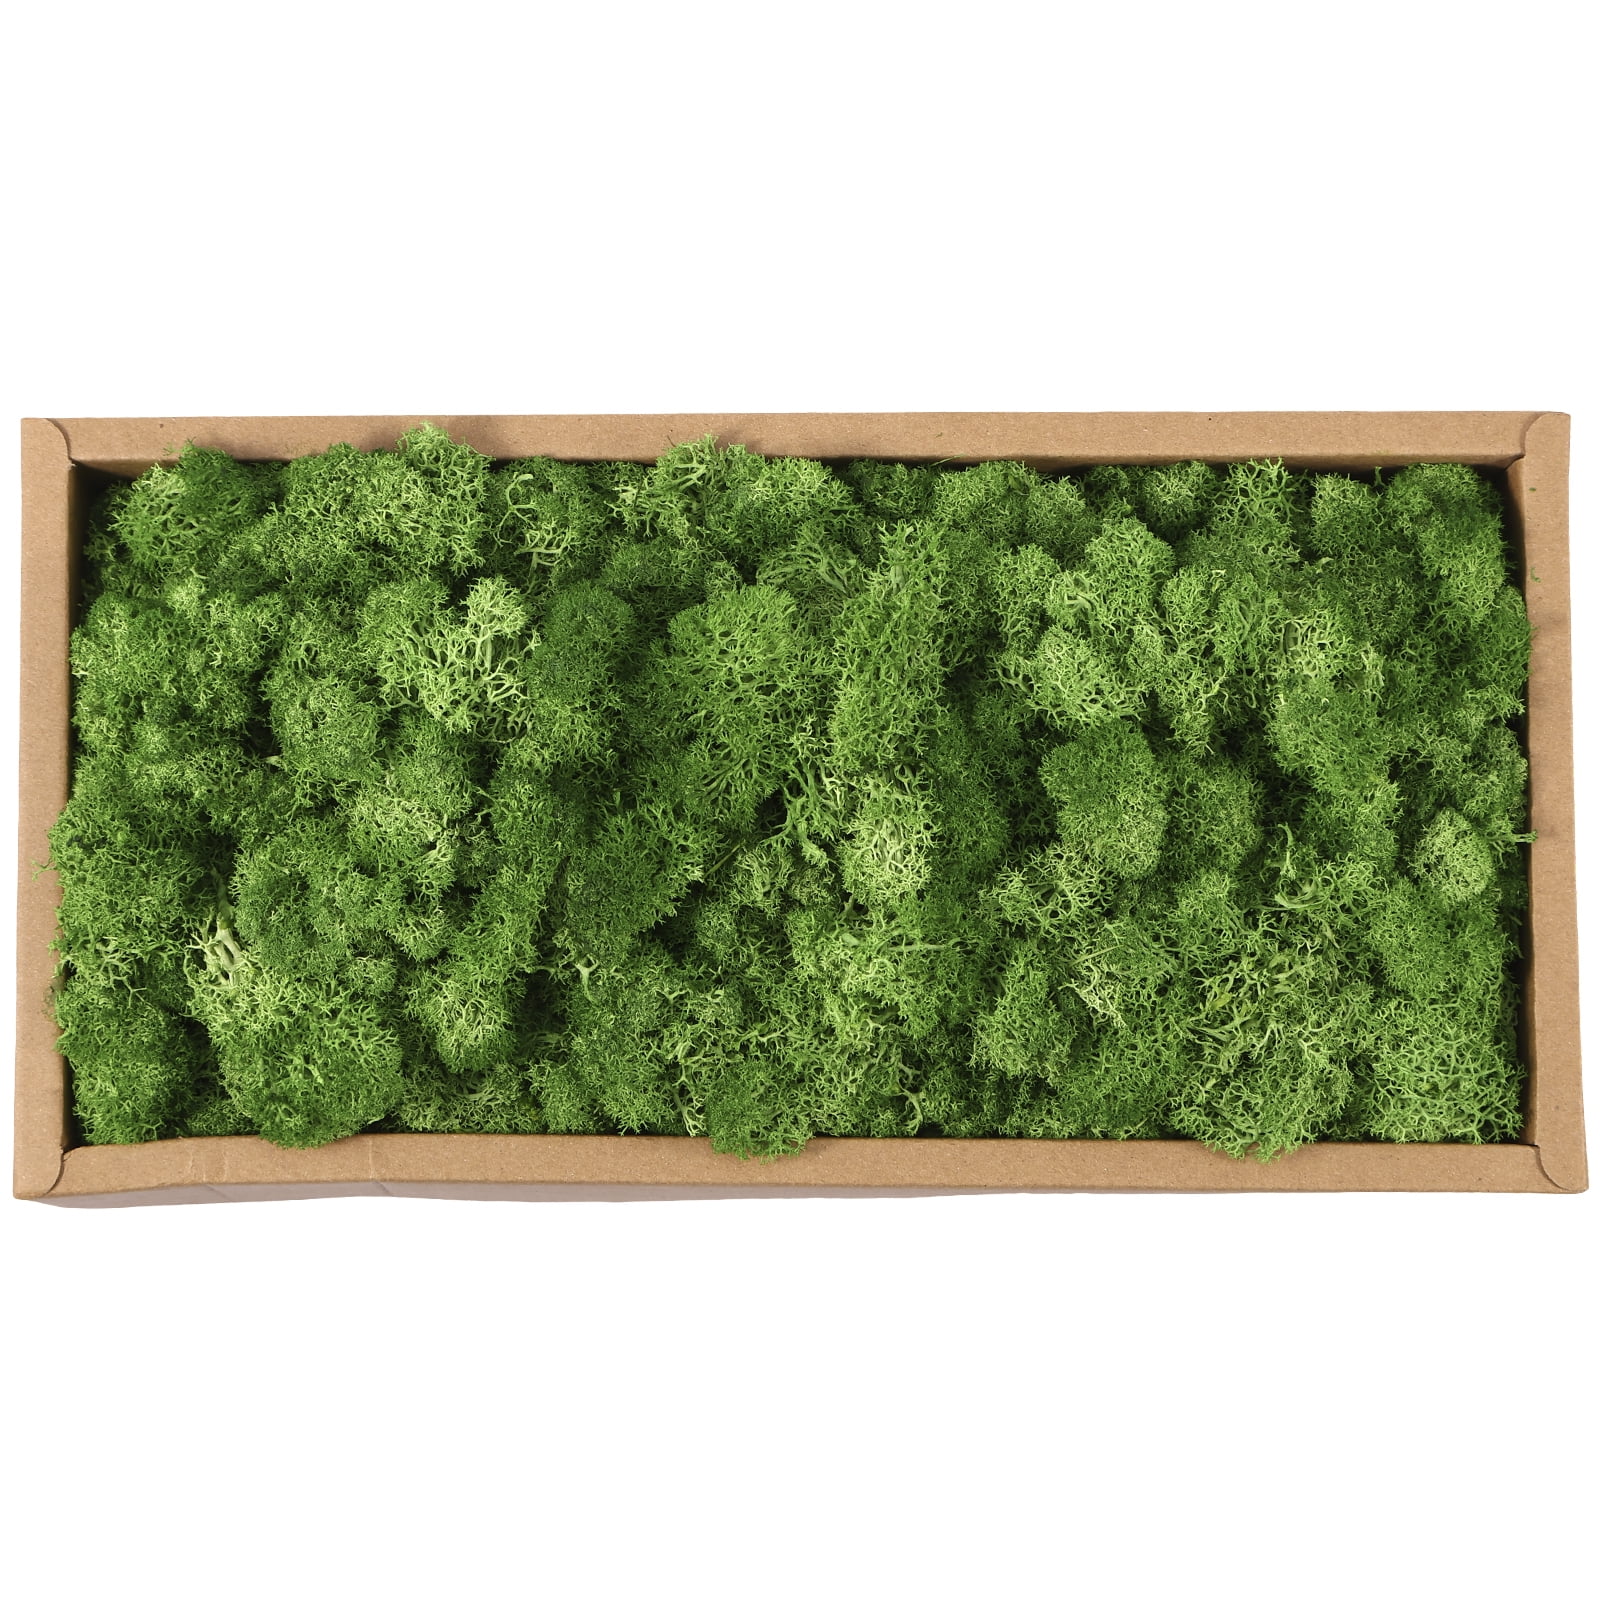 TCYPUHL Preserved Moss for Crafts Green Reindeer Moss for Potted Plants,  Craft Decorative Moss Decor for Wall Art, Dried Moss(7oz, Green)